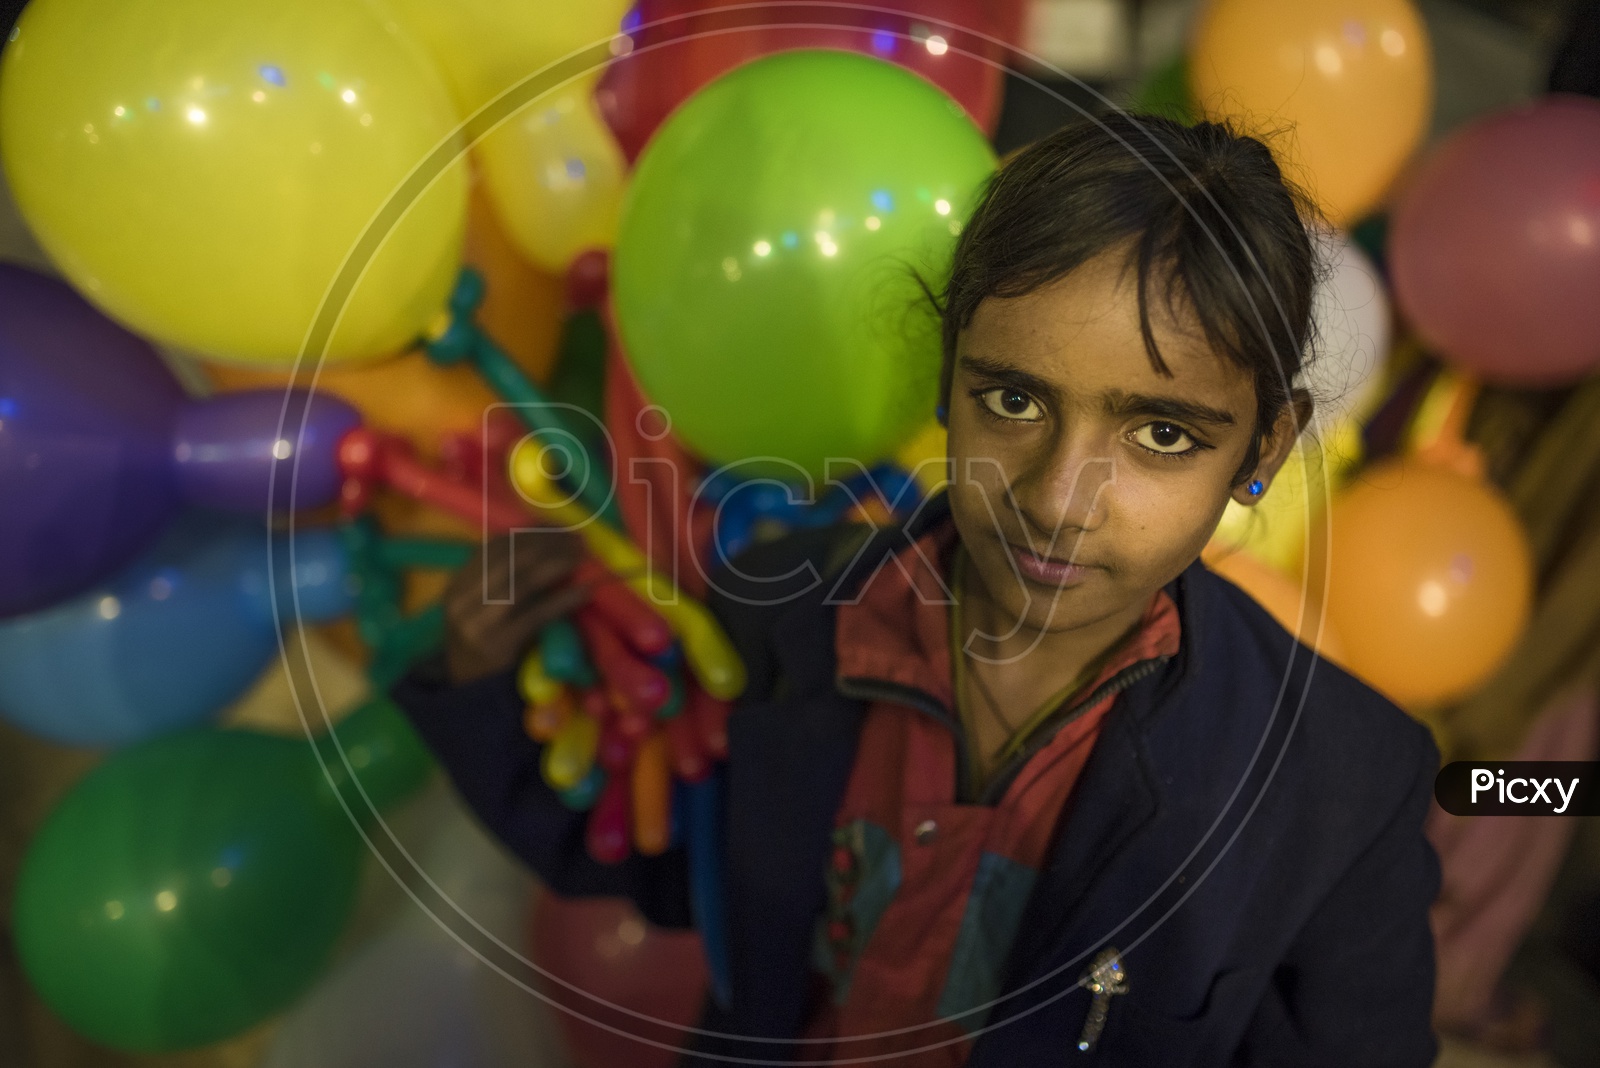 Girl Selling Balloons in the Streets